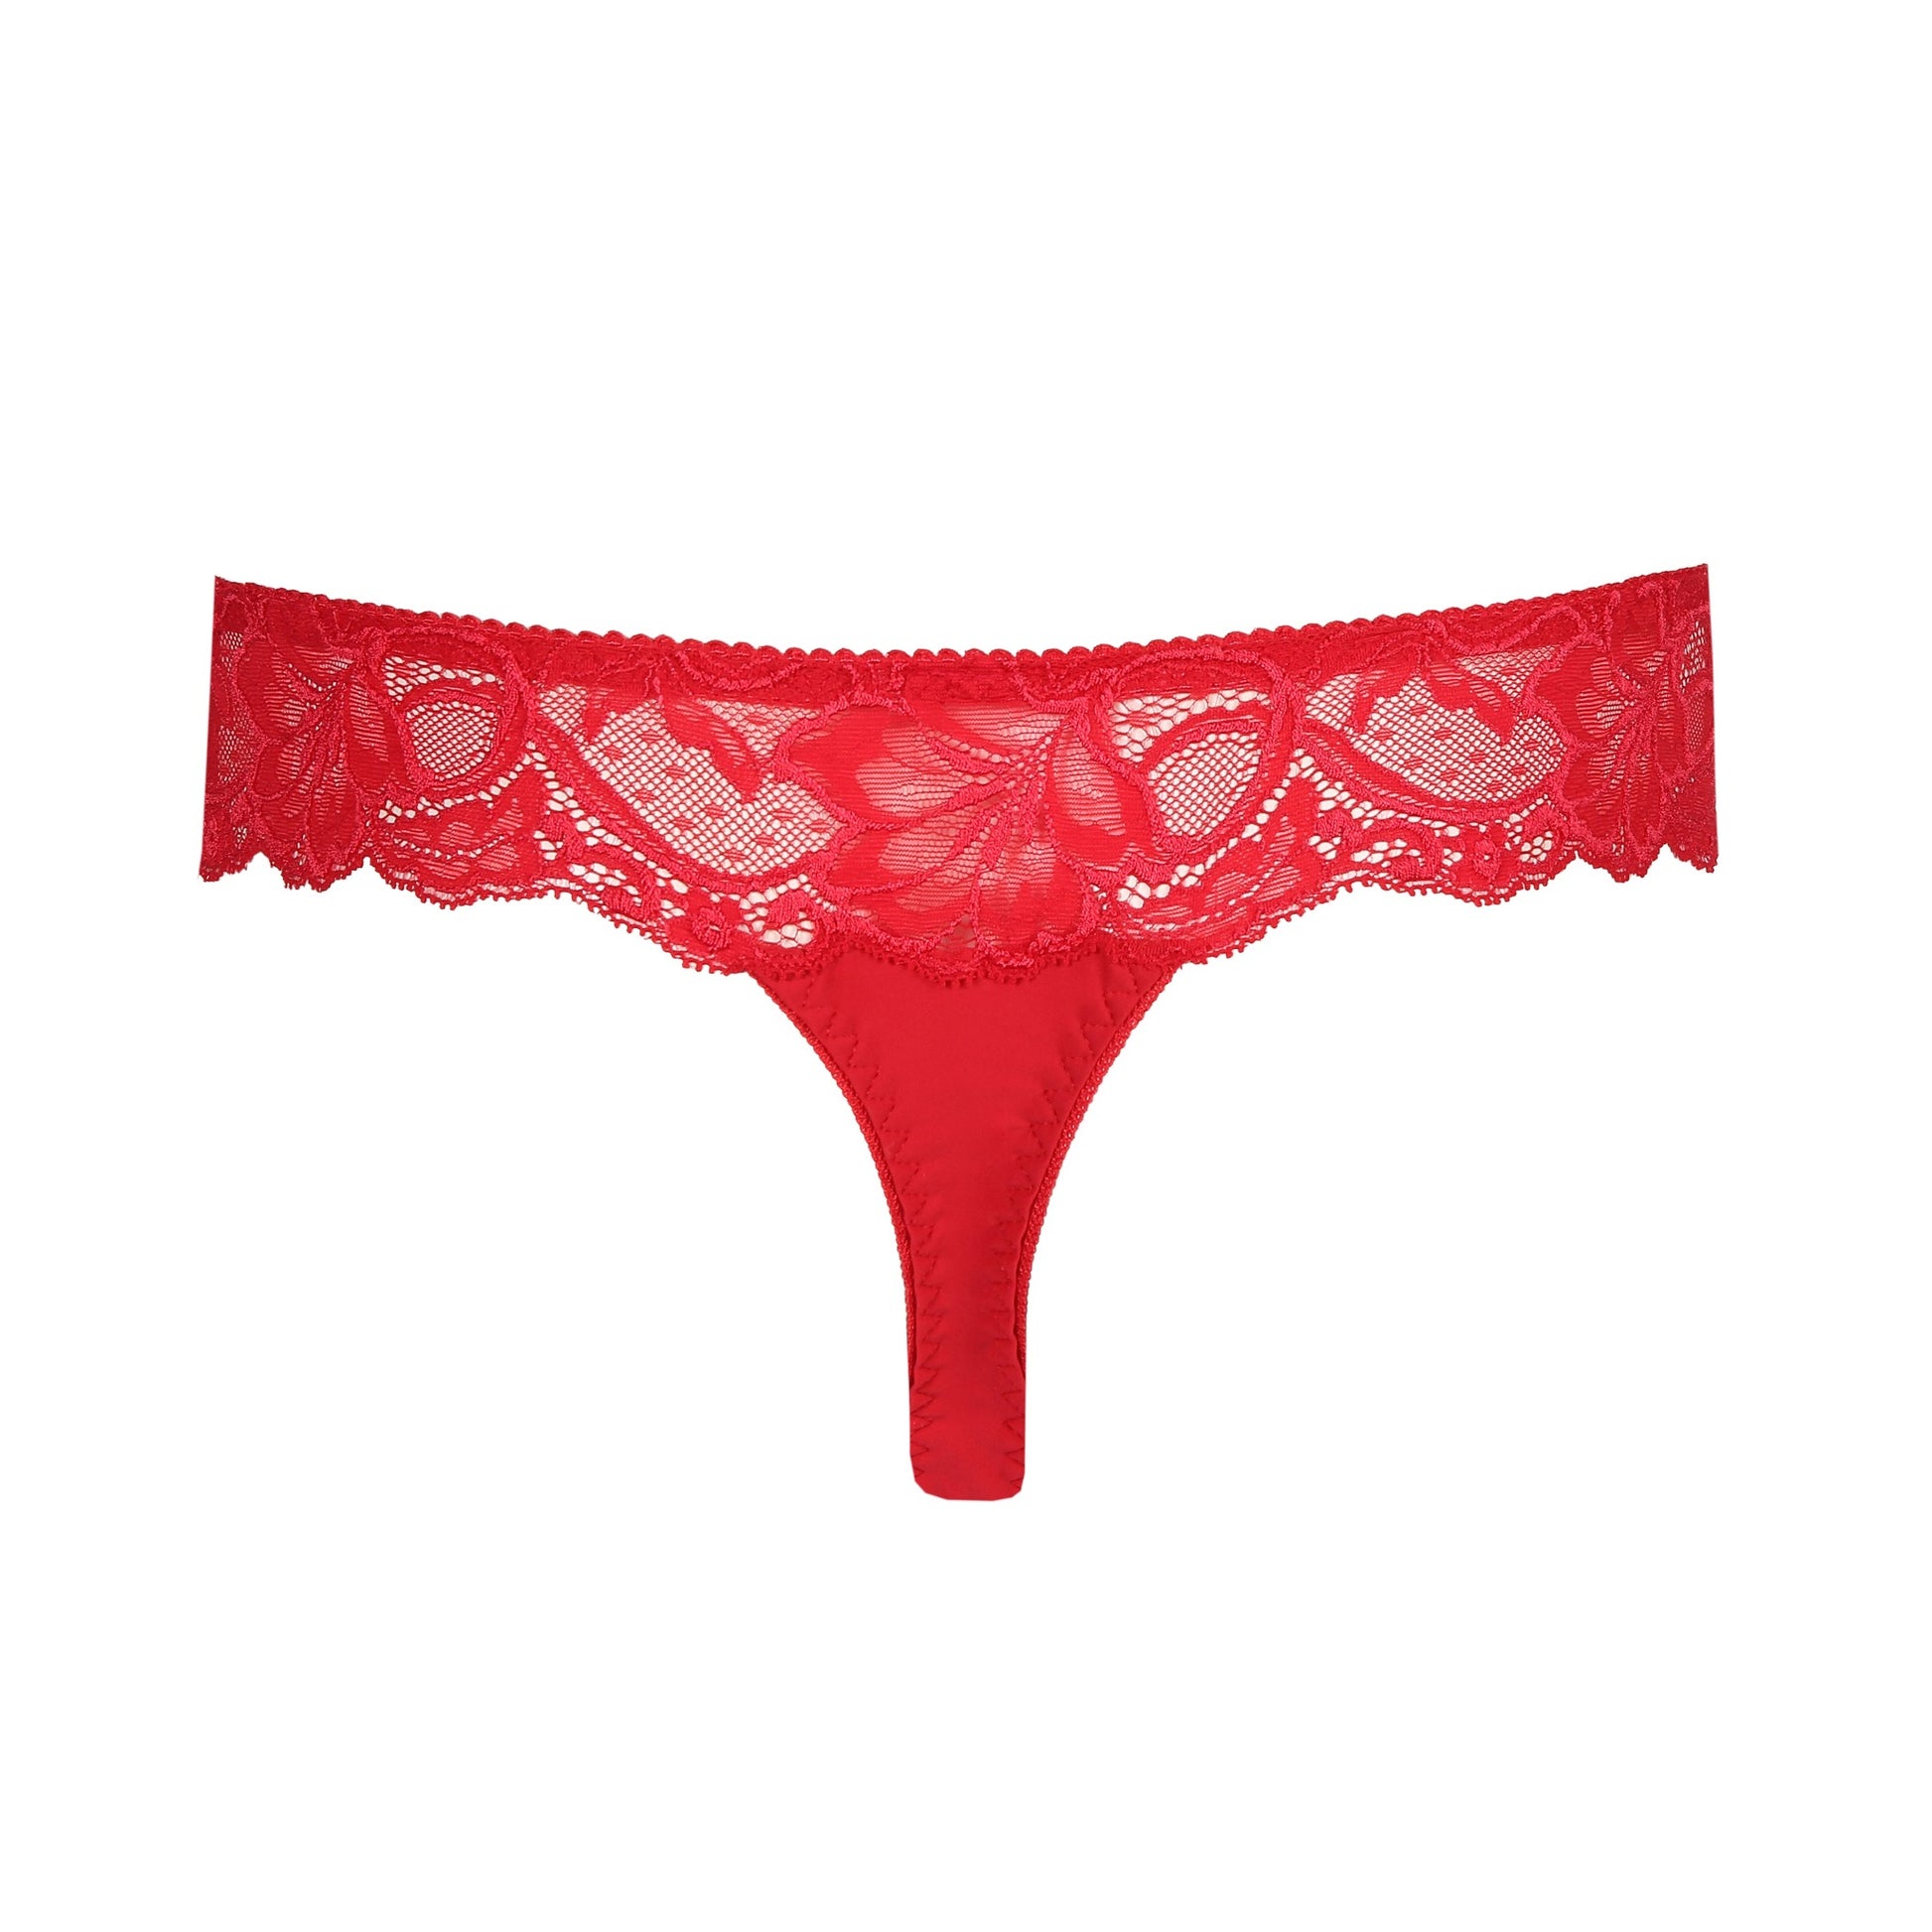 Back view of the Madison Thong in Scarlet by PrimaDonna.